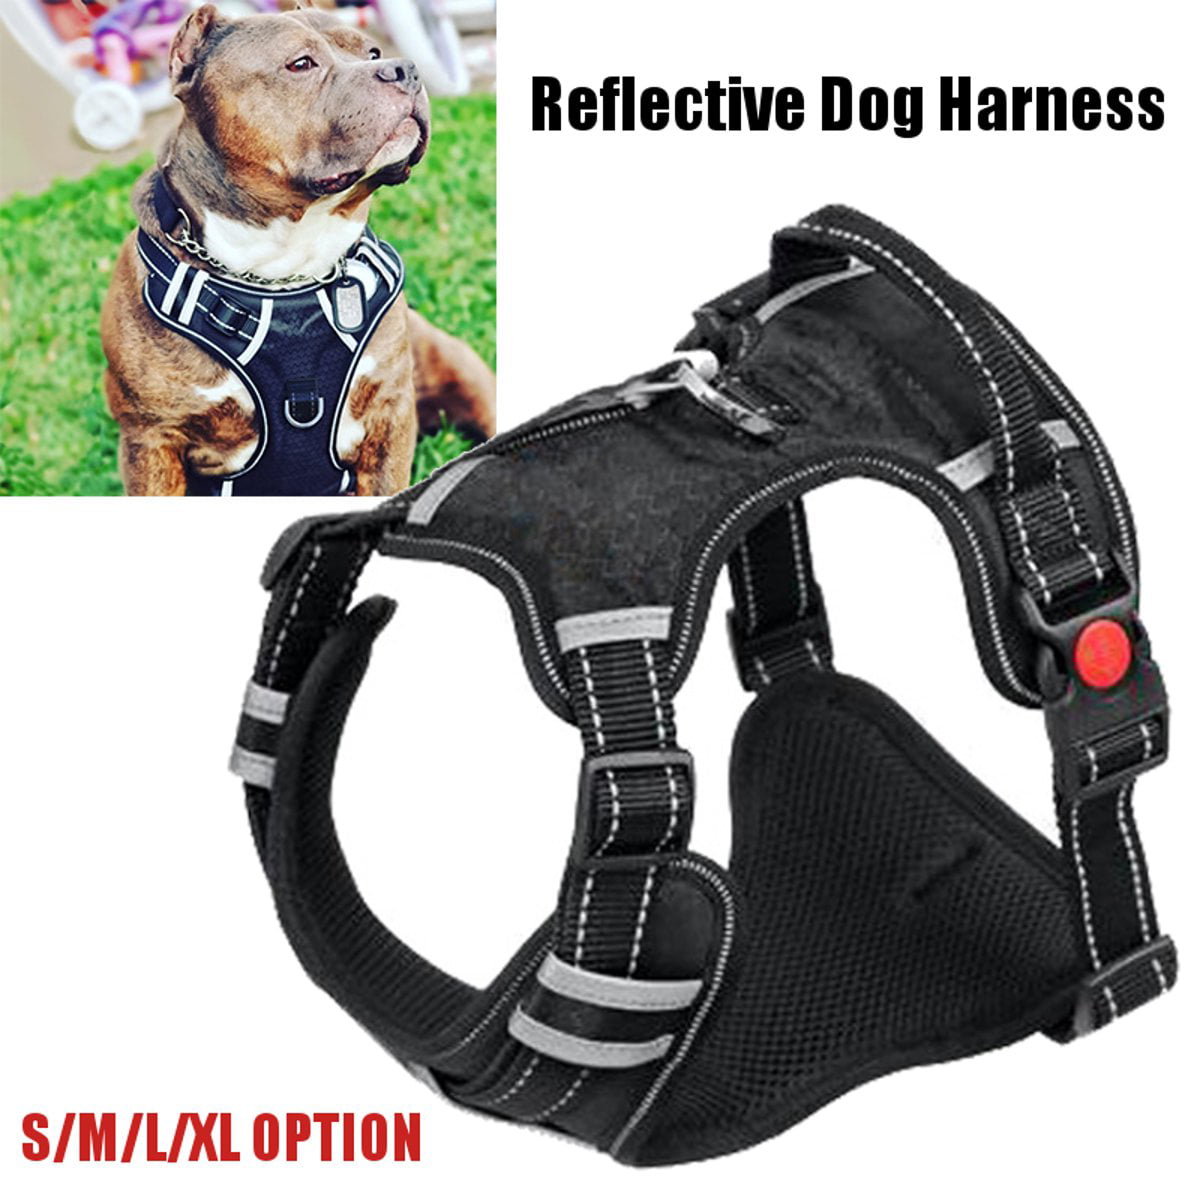 Reflective Dog Harness and Leash Quick Fit Pet Strap Vest for Small Large Dogs 